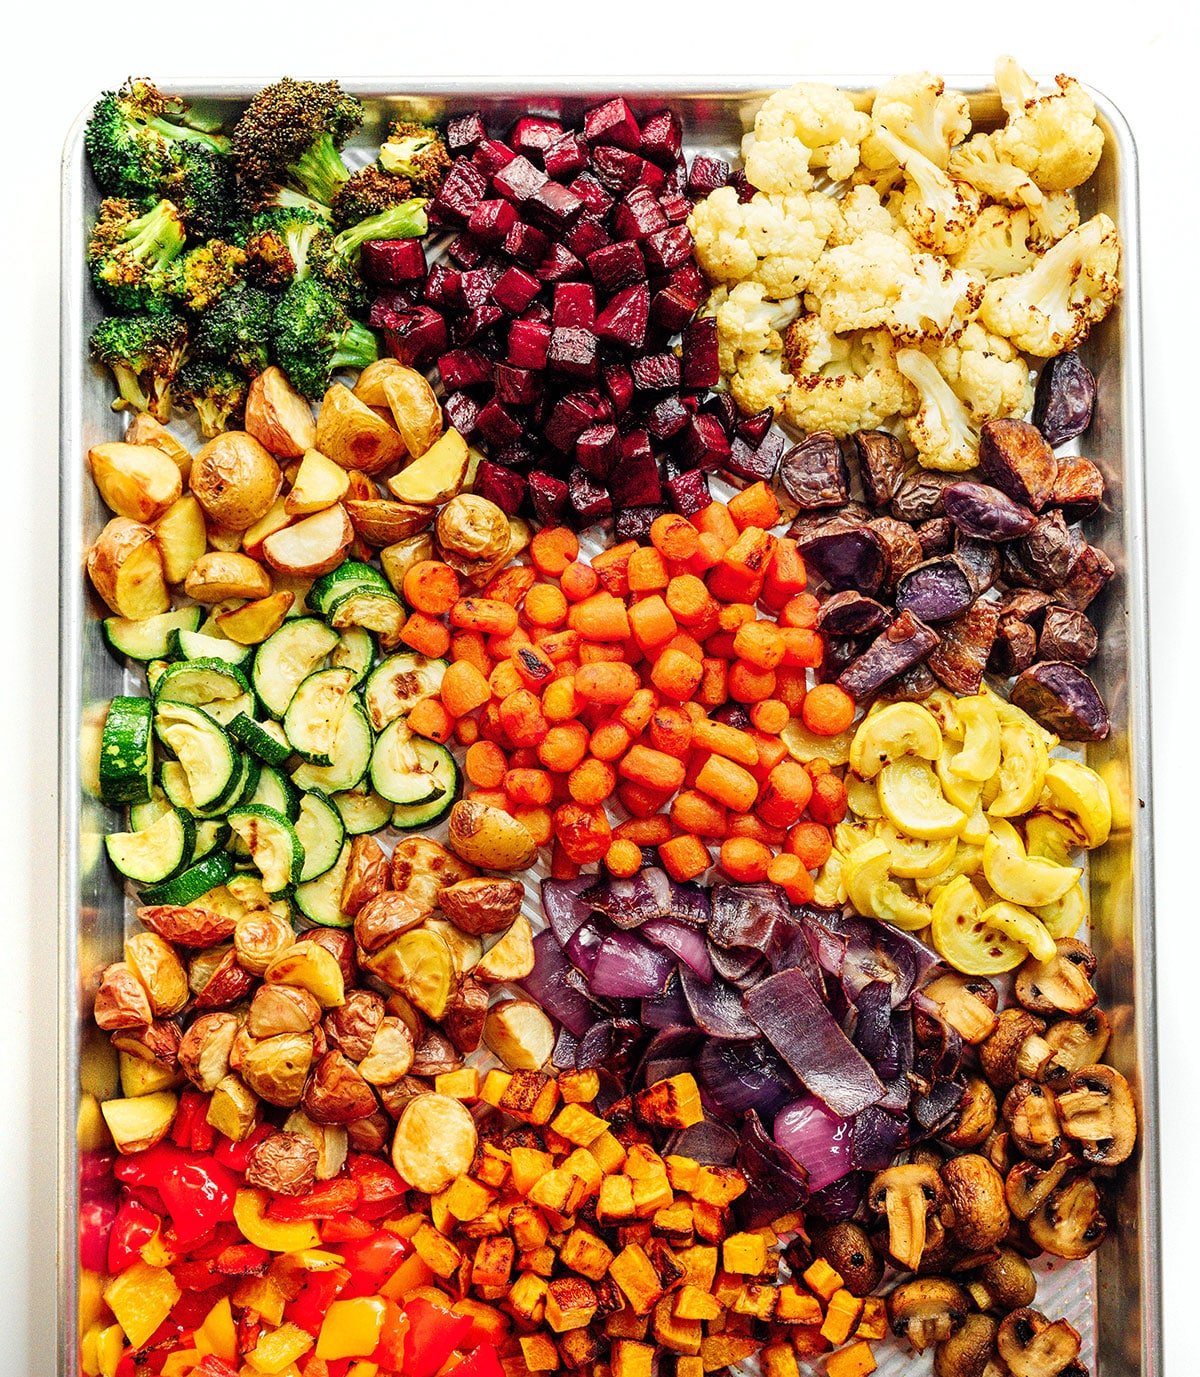 Many colorful veggies on a baking sheet next to an air fryer.